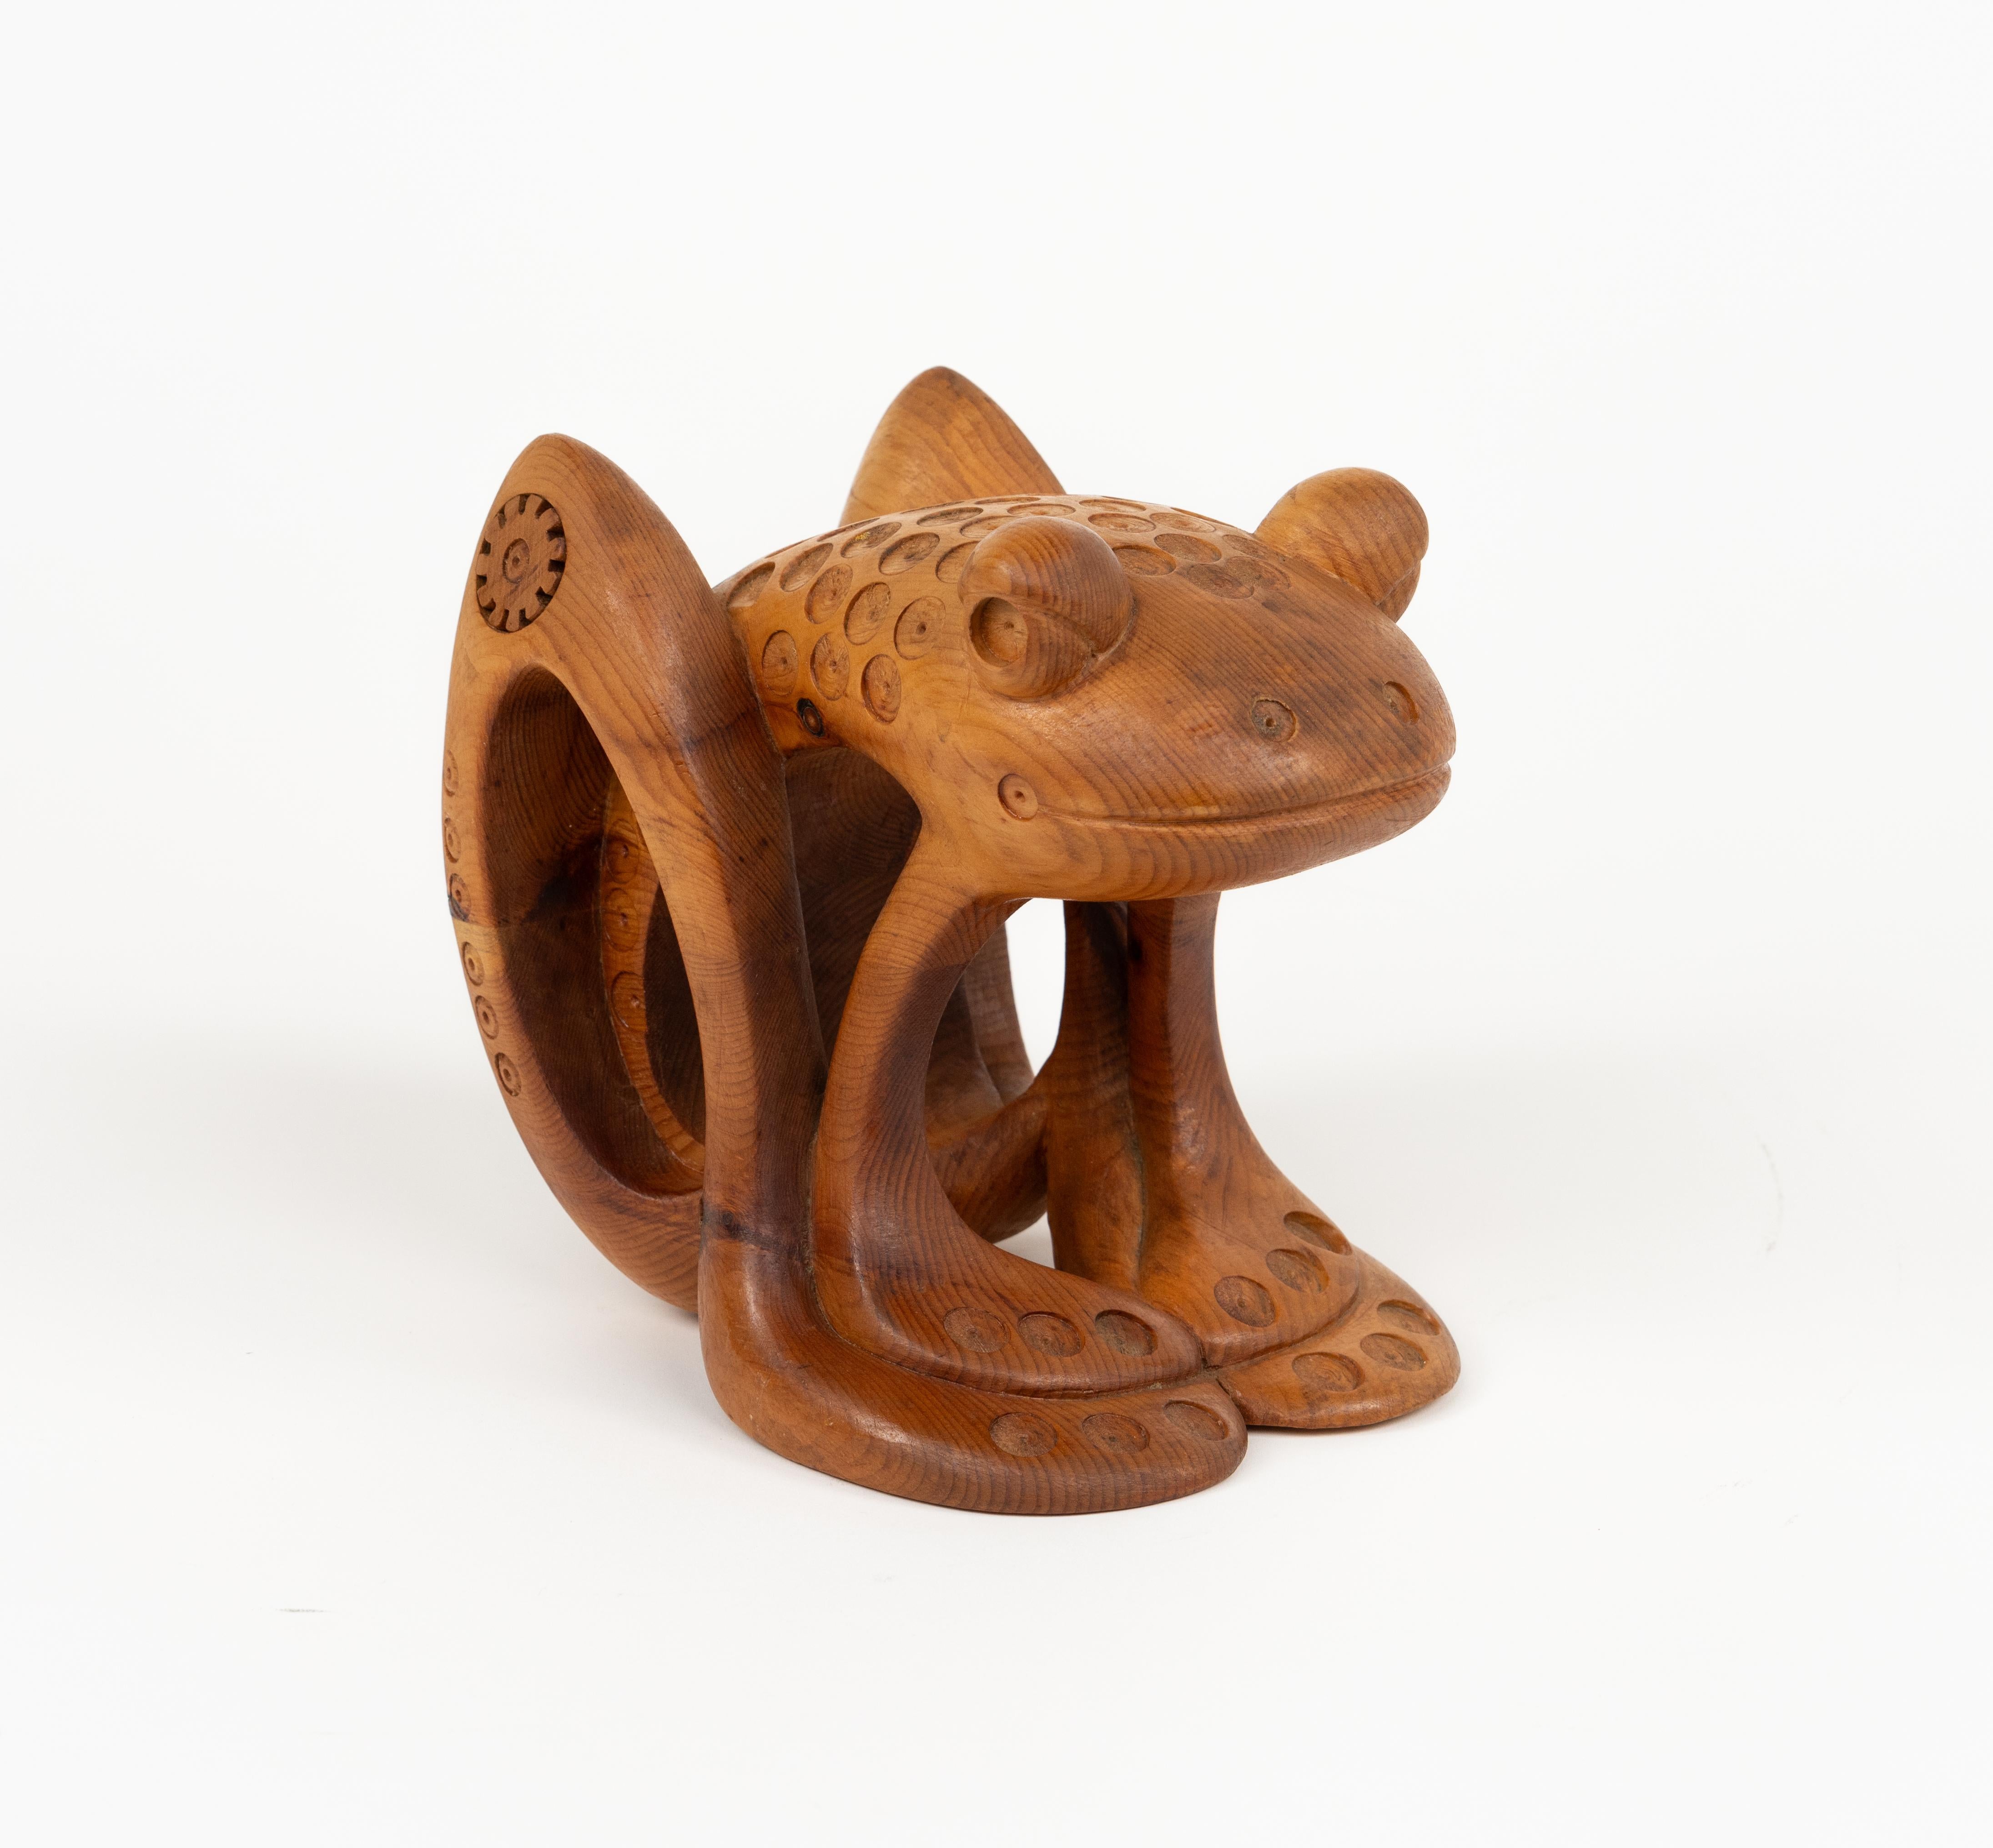 Pine Wood Decorative Sculpture Shape Frog by Ferdinando Codognotto, Italy 2001 For Sale 7